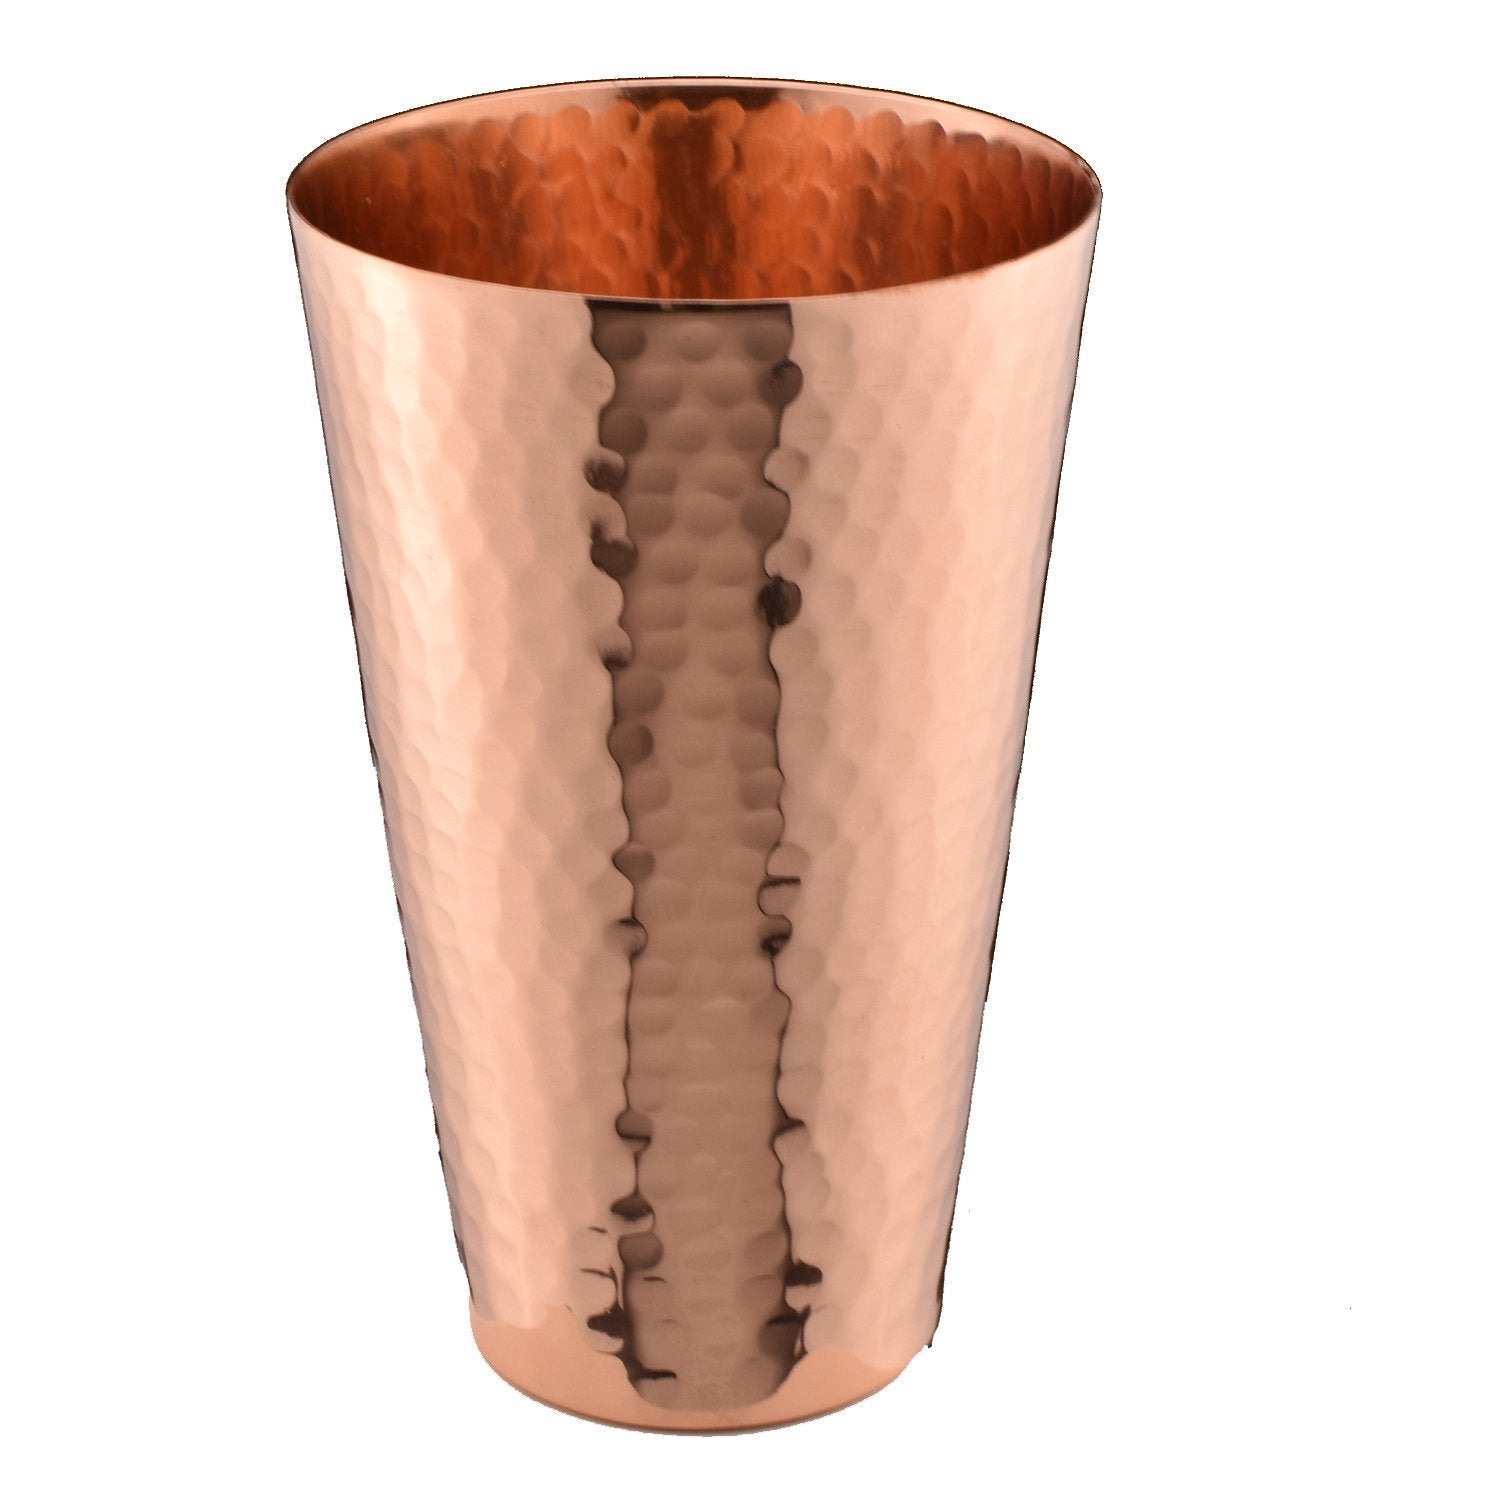 Prince of Scots 18 Ounce Hammered Copper Tumbler Cup-Dining and Entertaining-Prince of Scots-, -Prince of Scots